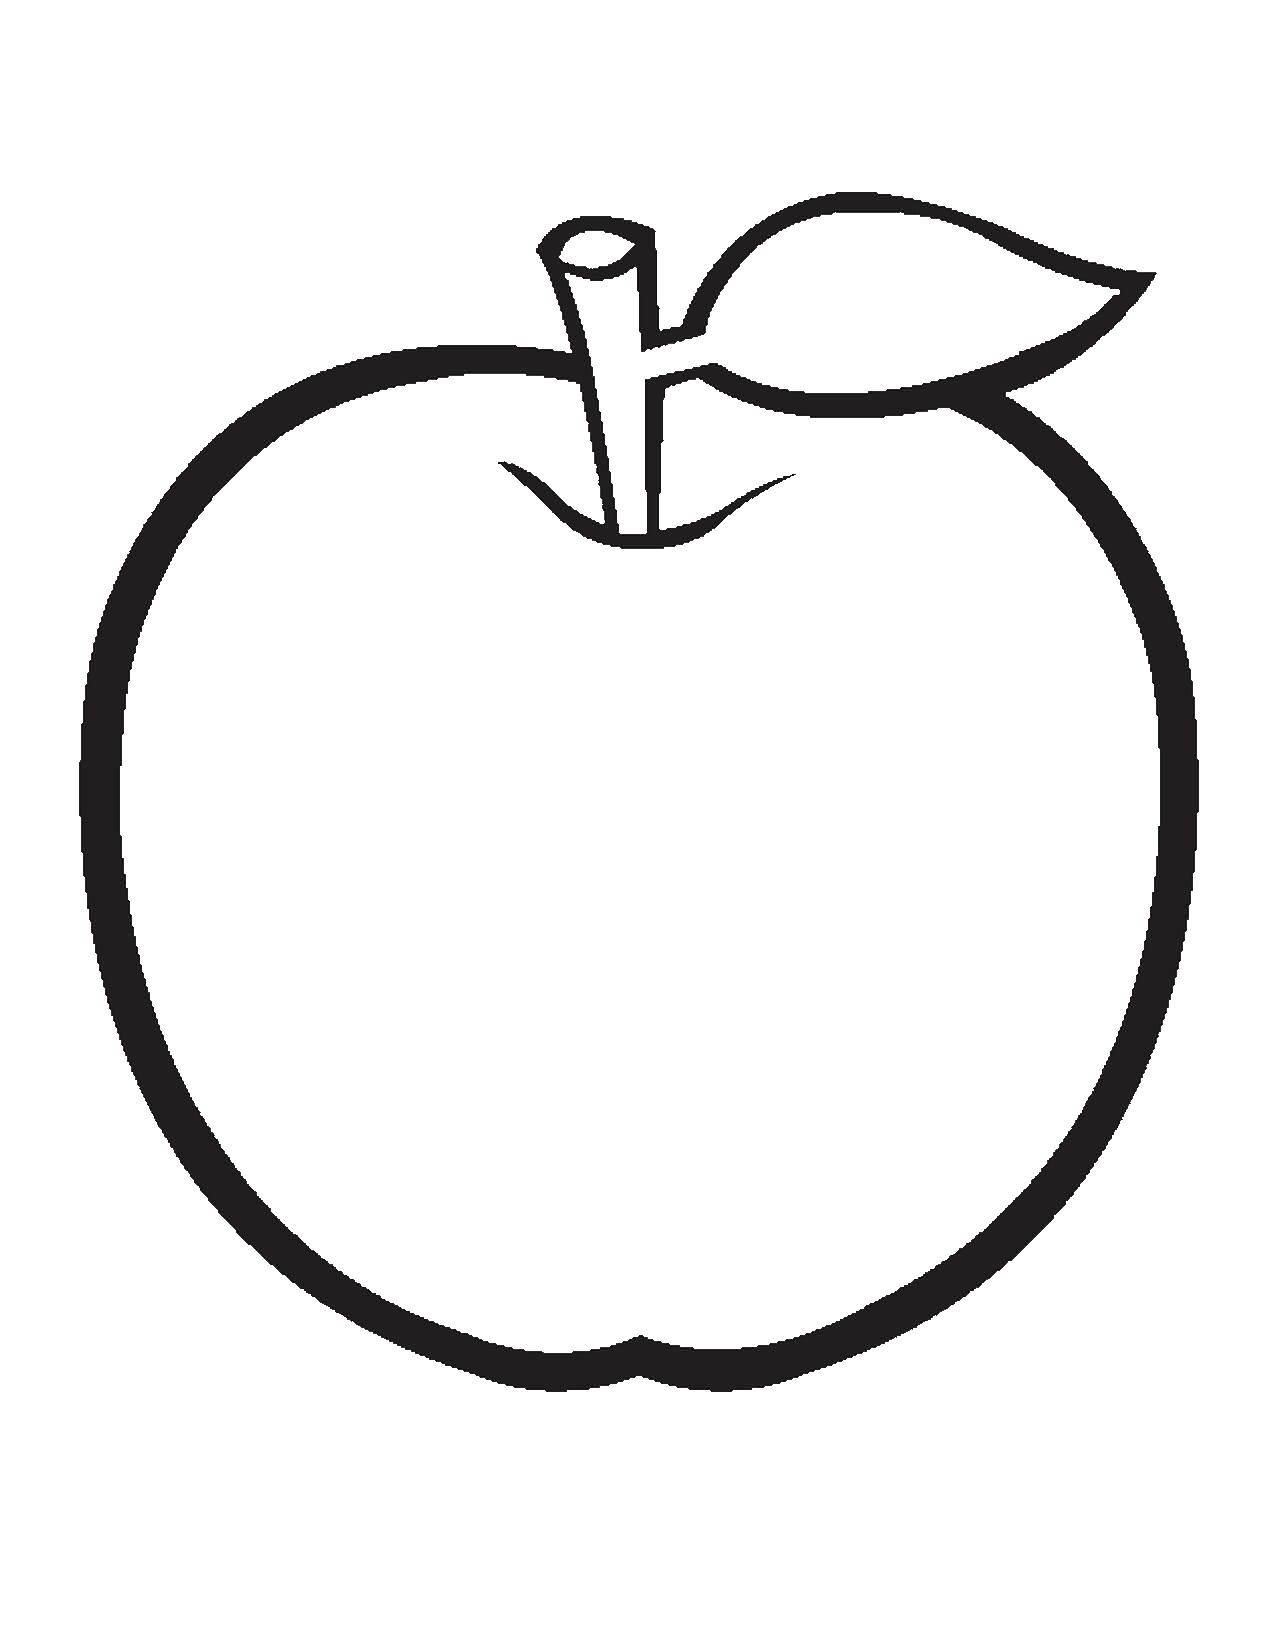 Coloring Delicious Apple. Category Coloring pages for kids. Tags:  fruit, Apple.